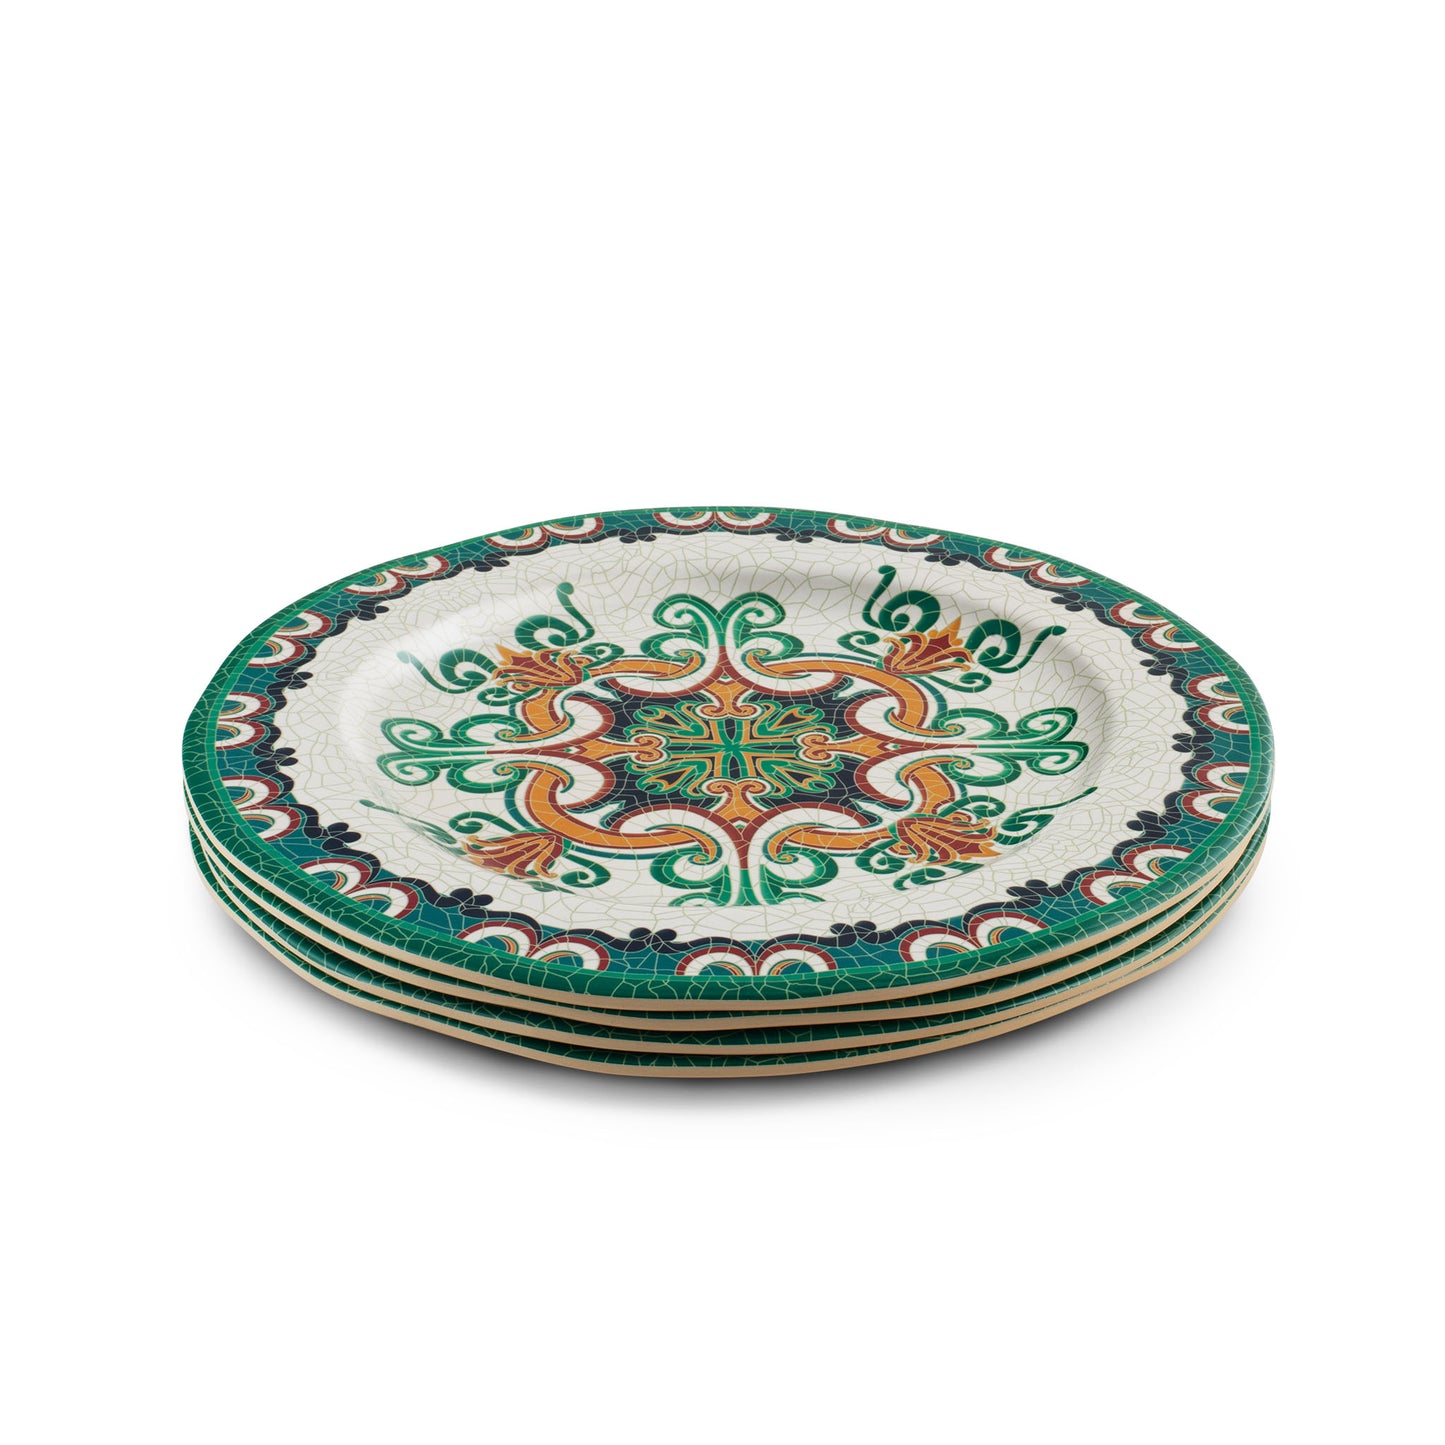 The Plate Story - Cabana Round Dinner Plate